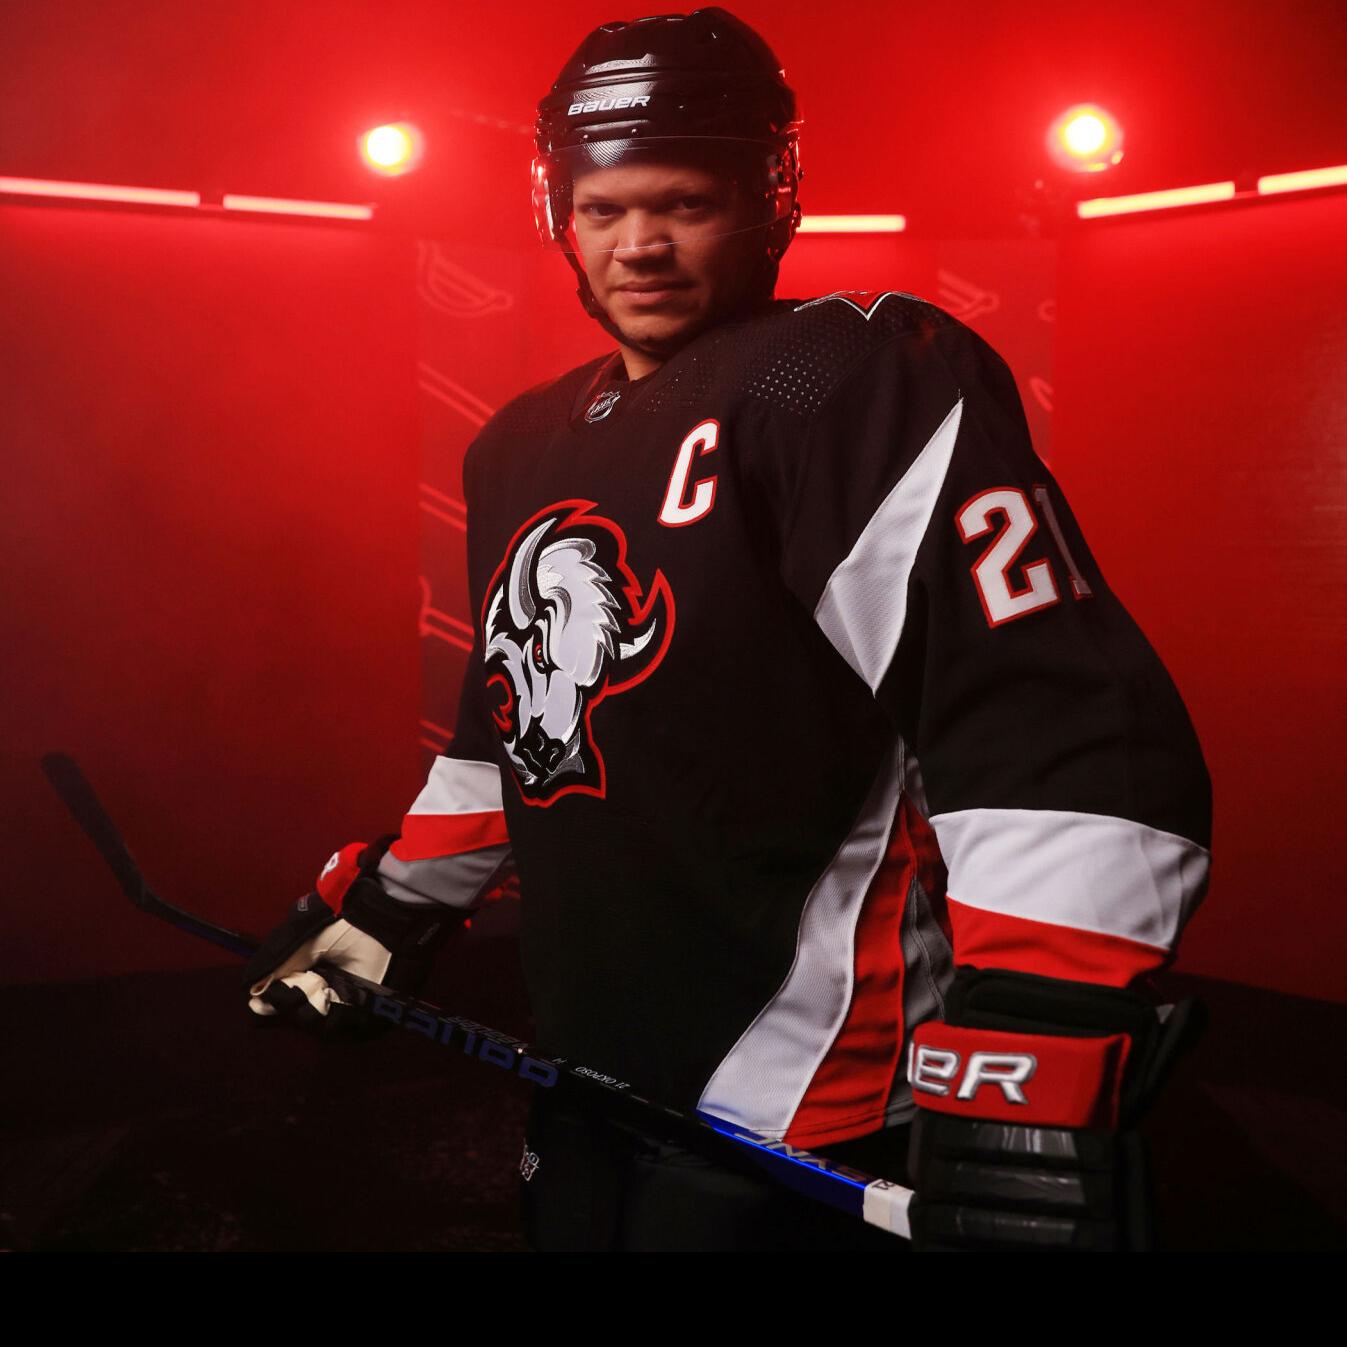 New Sabres Store Bringing Back Red And Black Look?